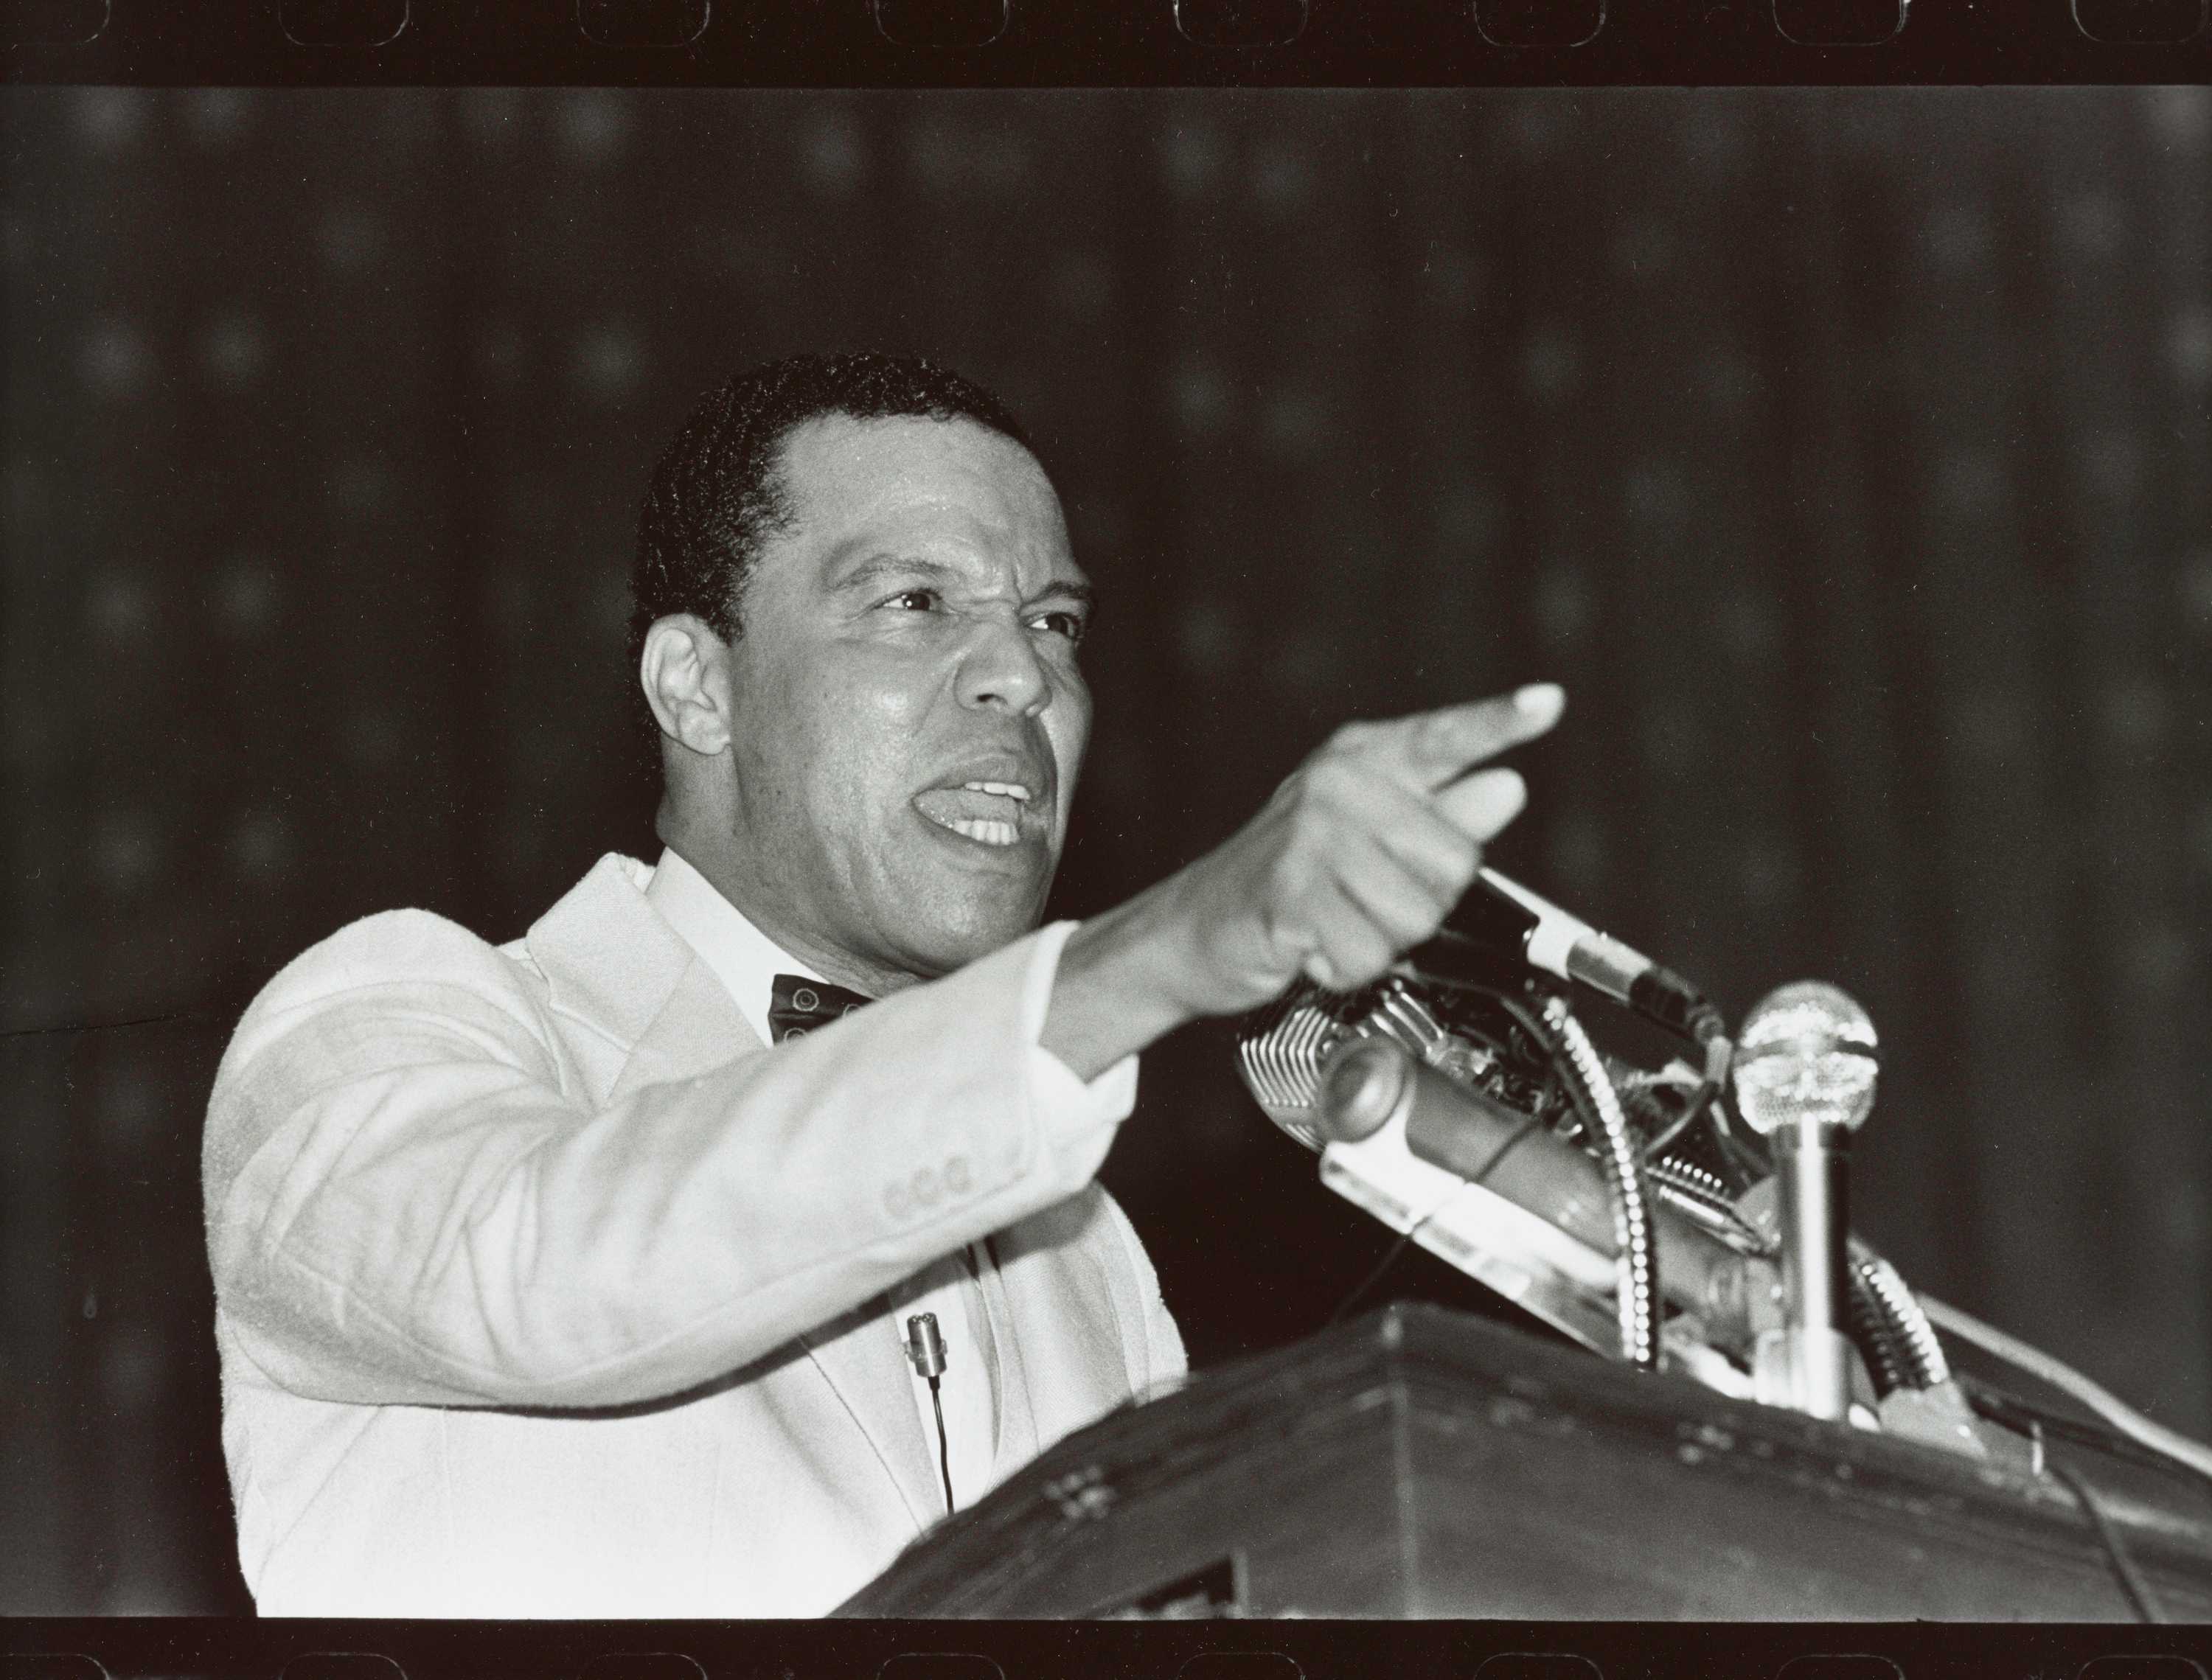 A black-and-white photograph of Louis Farrakhan speaking at a podium and gesturing with a pointed finger. The photograph is stamped and inscribed on the back.